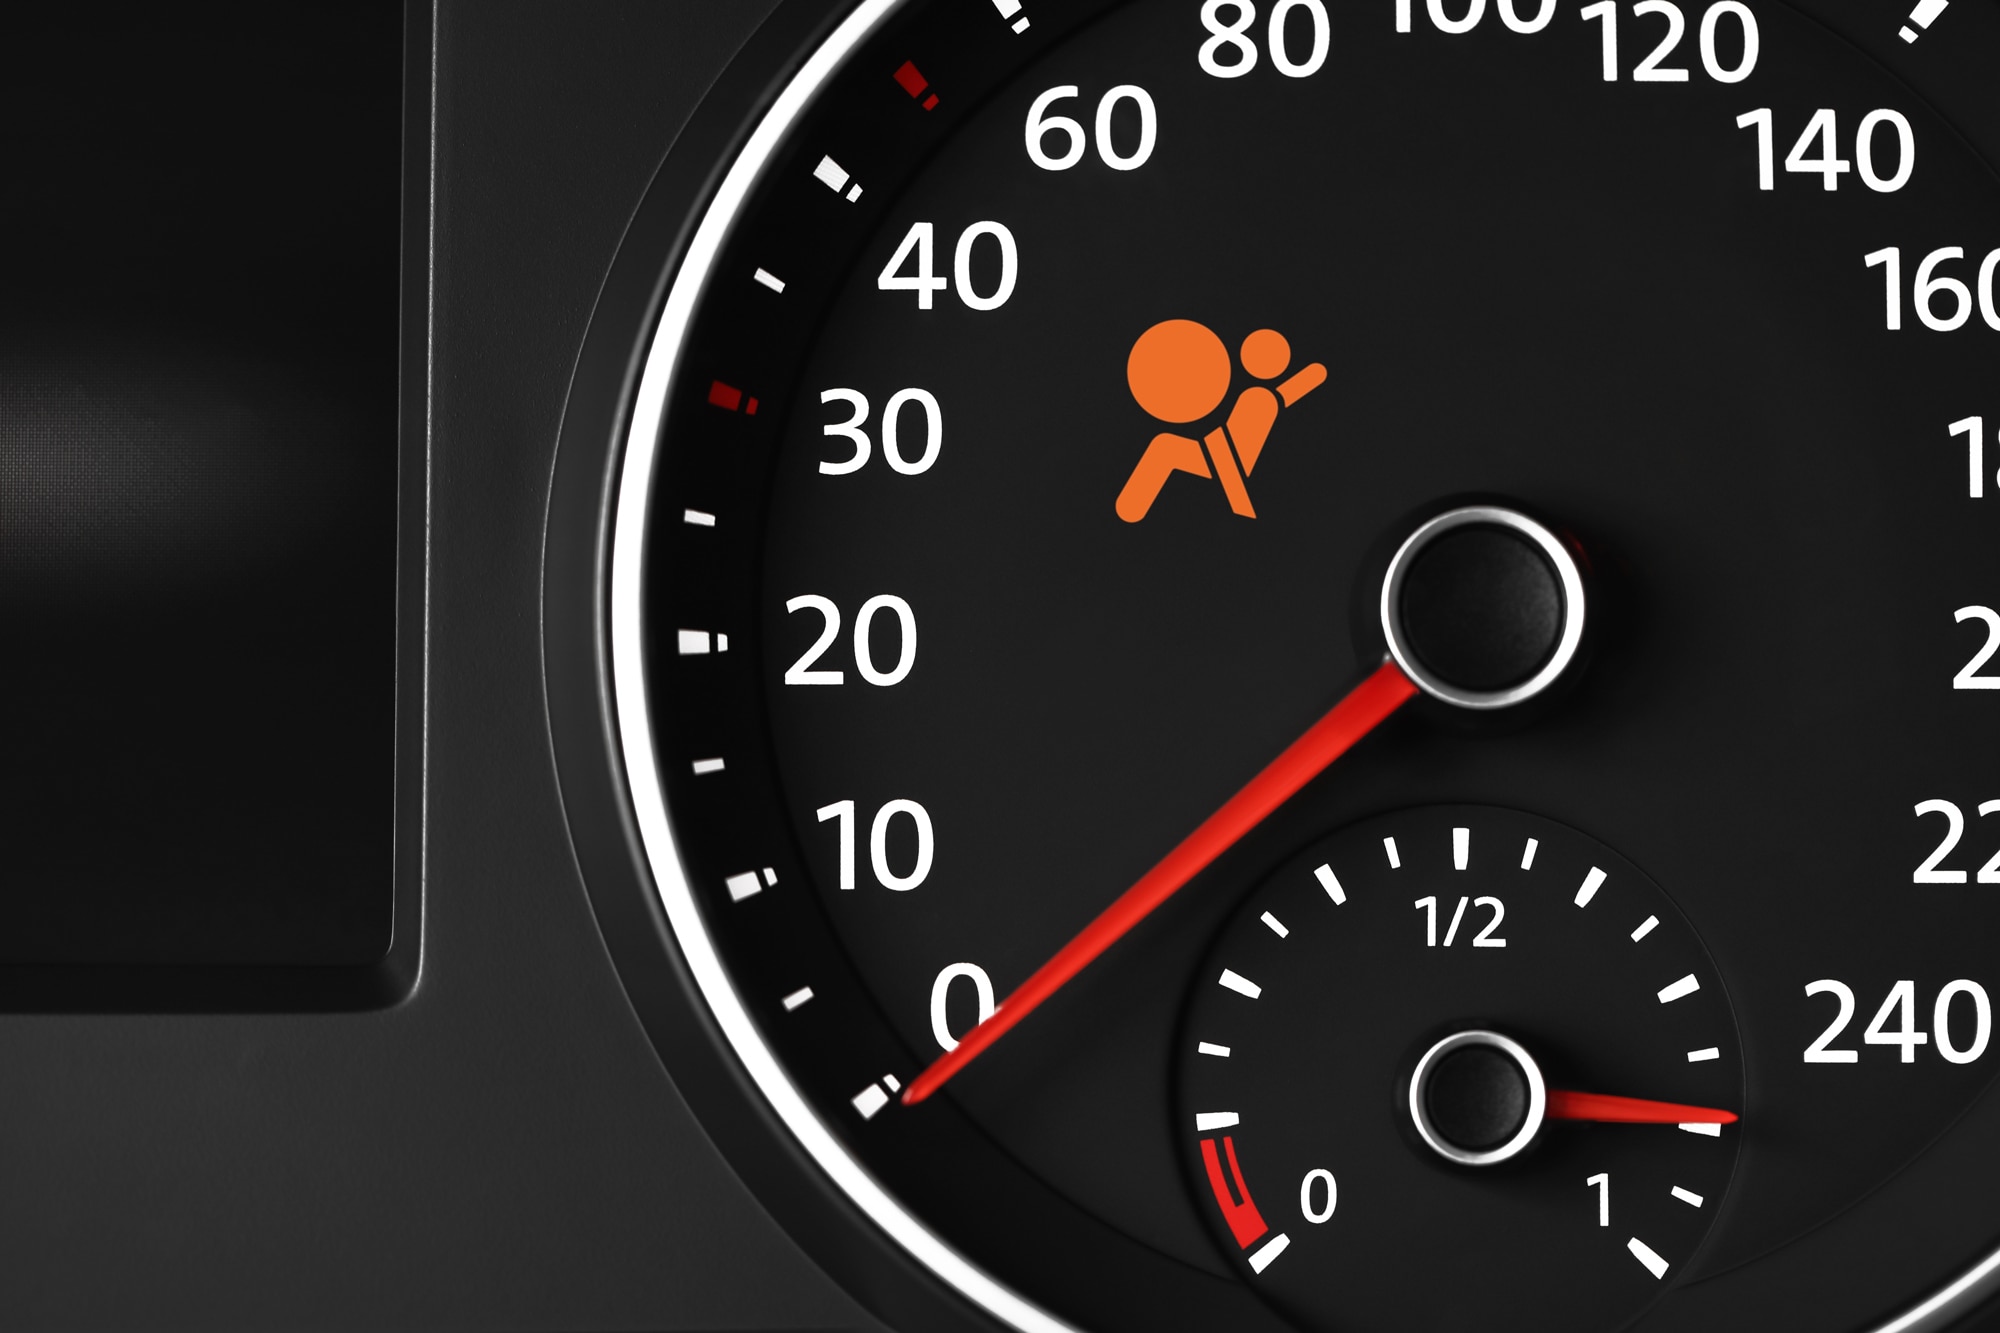 Close-up view of dashboard with orange airbag warning light on speedometer